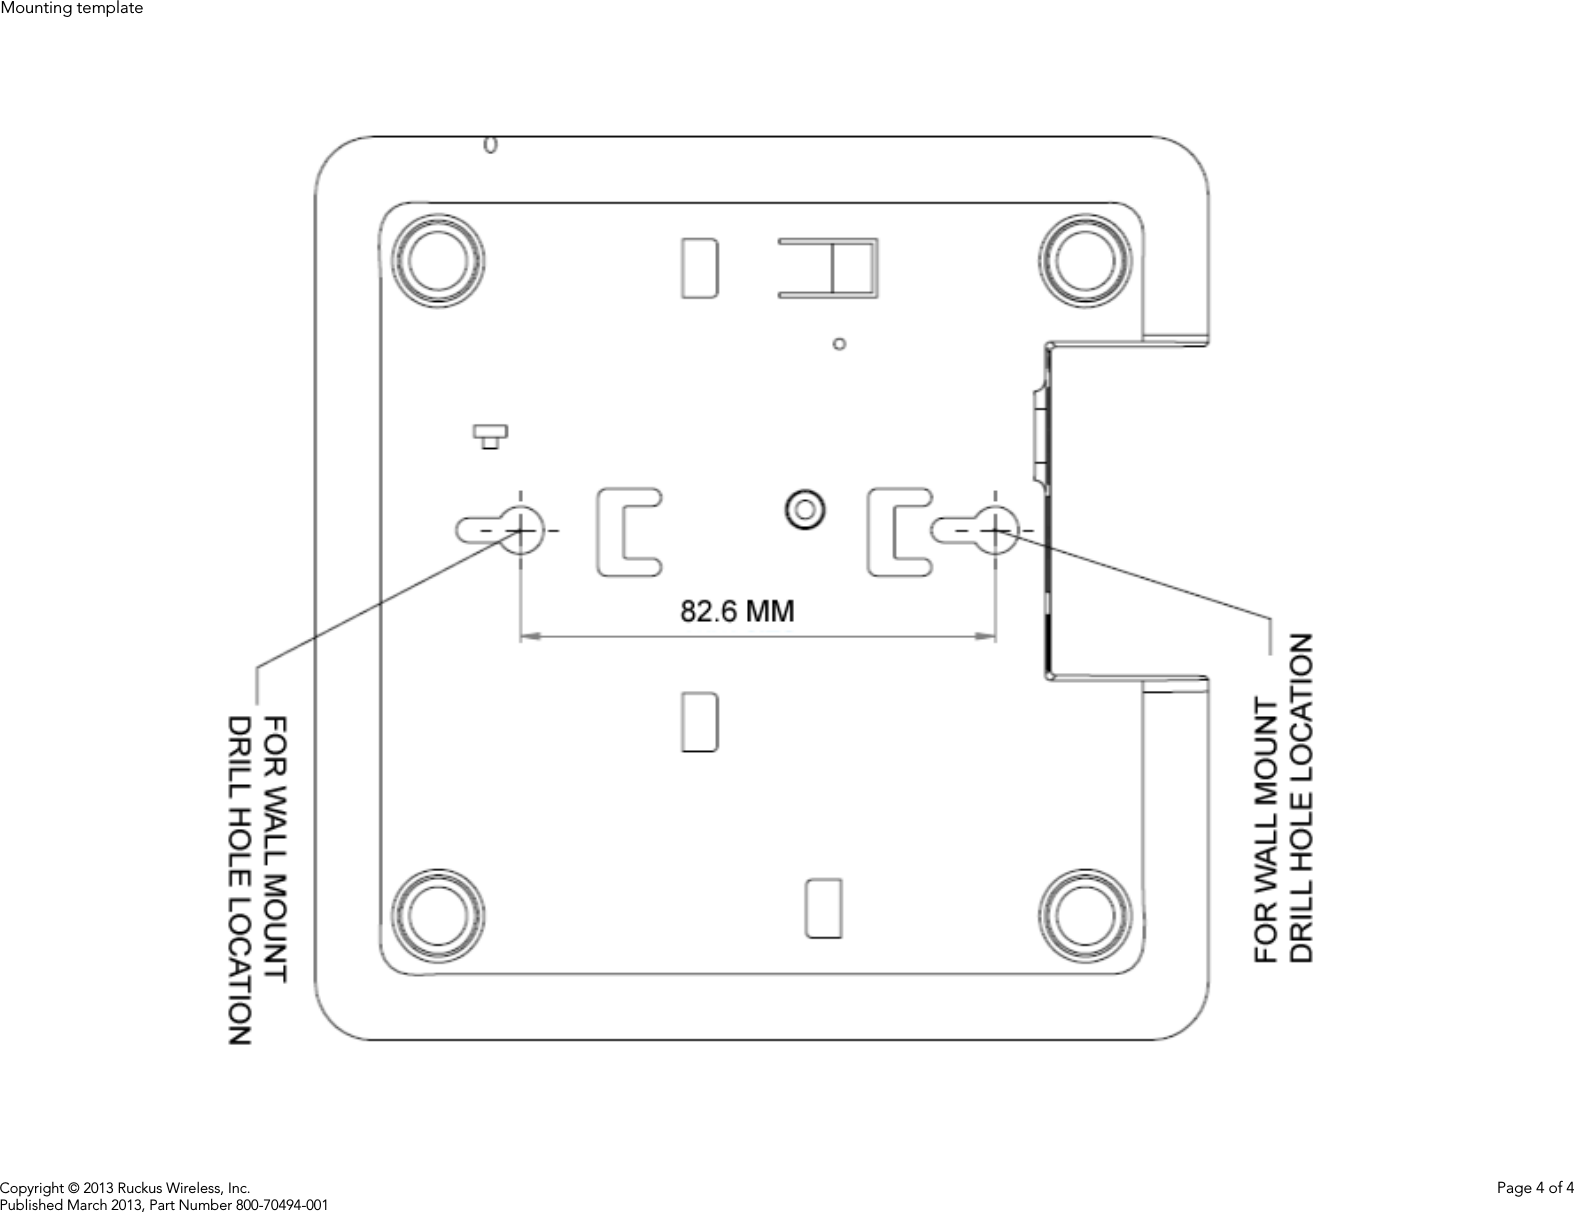 Copyright © 2013 Ruckus Wireless, Inc. Page 4 of 4Published March 2013, Part Number 800-70494-001Mounting template